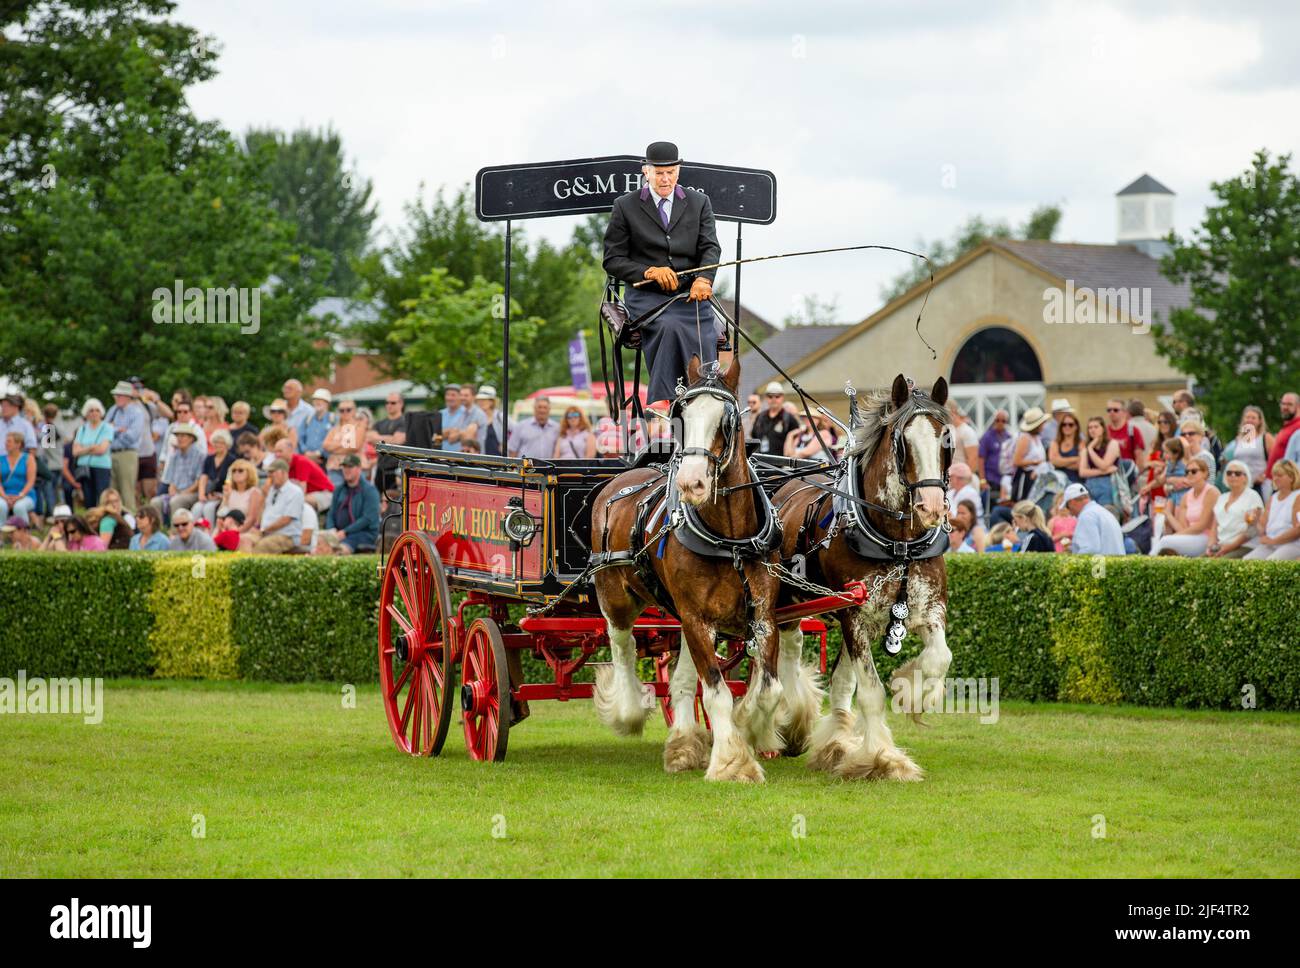 Harrogate, North Yorkshire, UK. July 14 2021.  G I and M Holmes heavy horse team in the main Show ring at the Great Yorkshire Show 2021.  Horizontal. Stock Photo